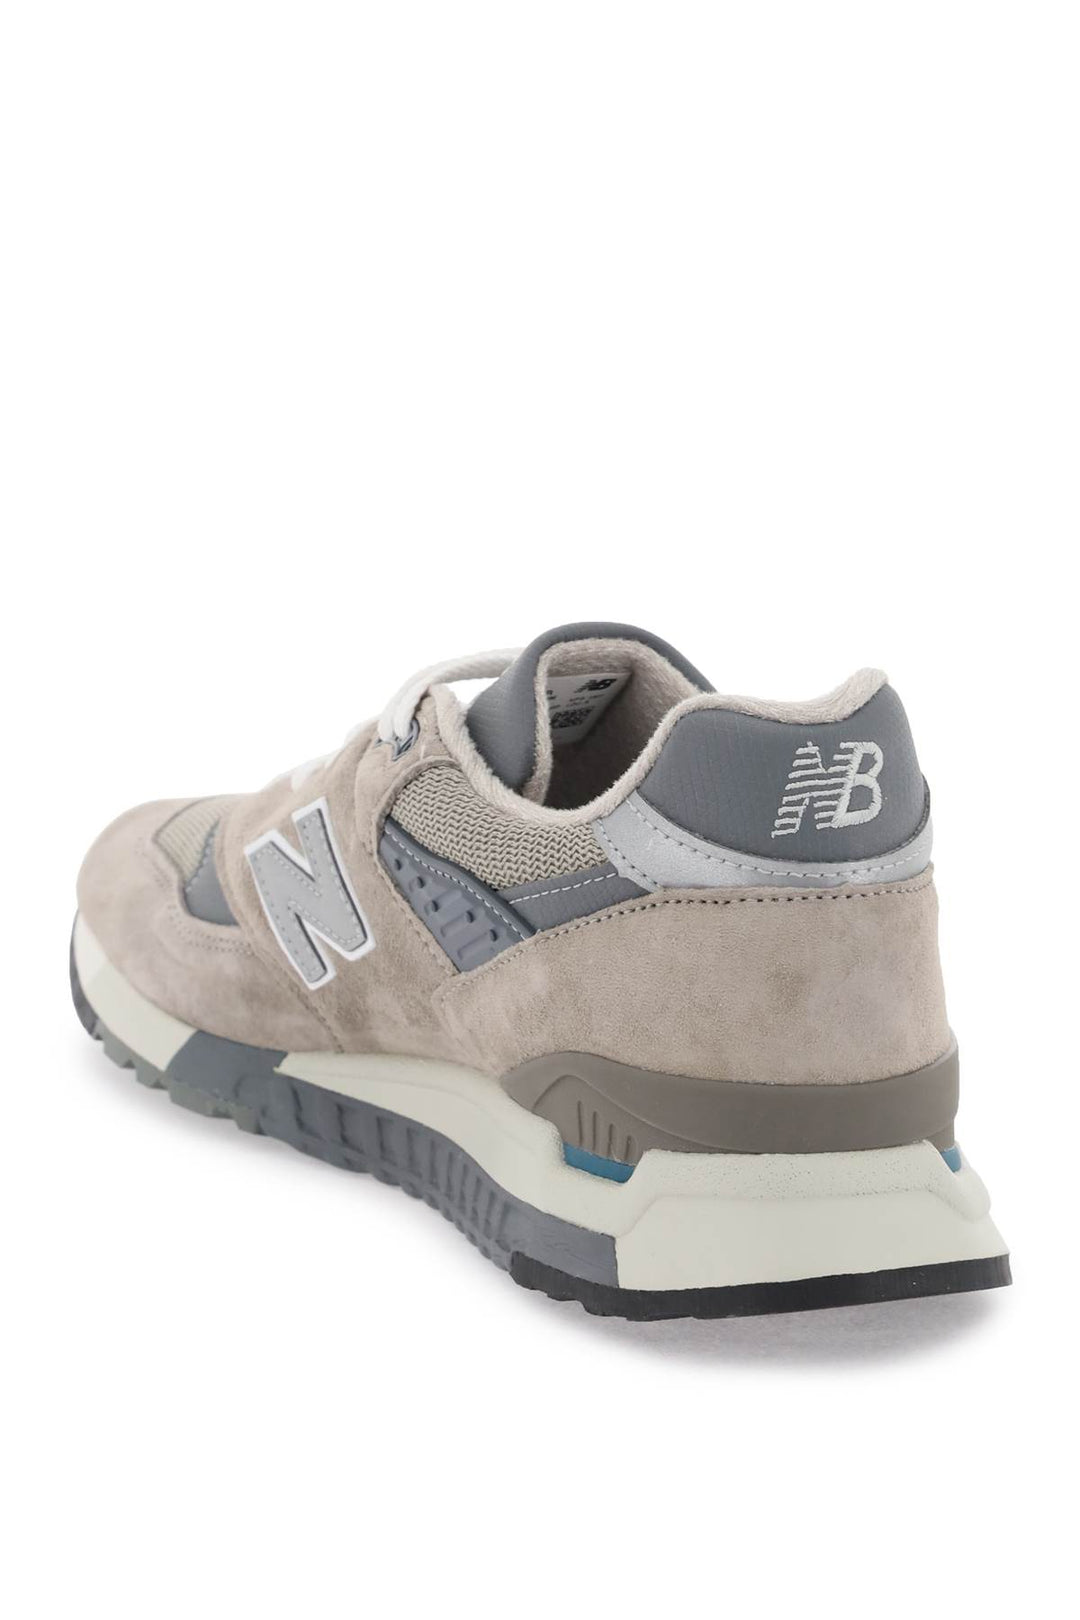 New Balance 'Made In Usa 998 Core' Sneakers   Grey